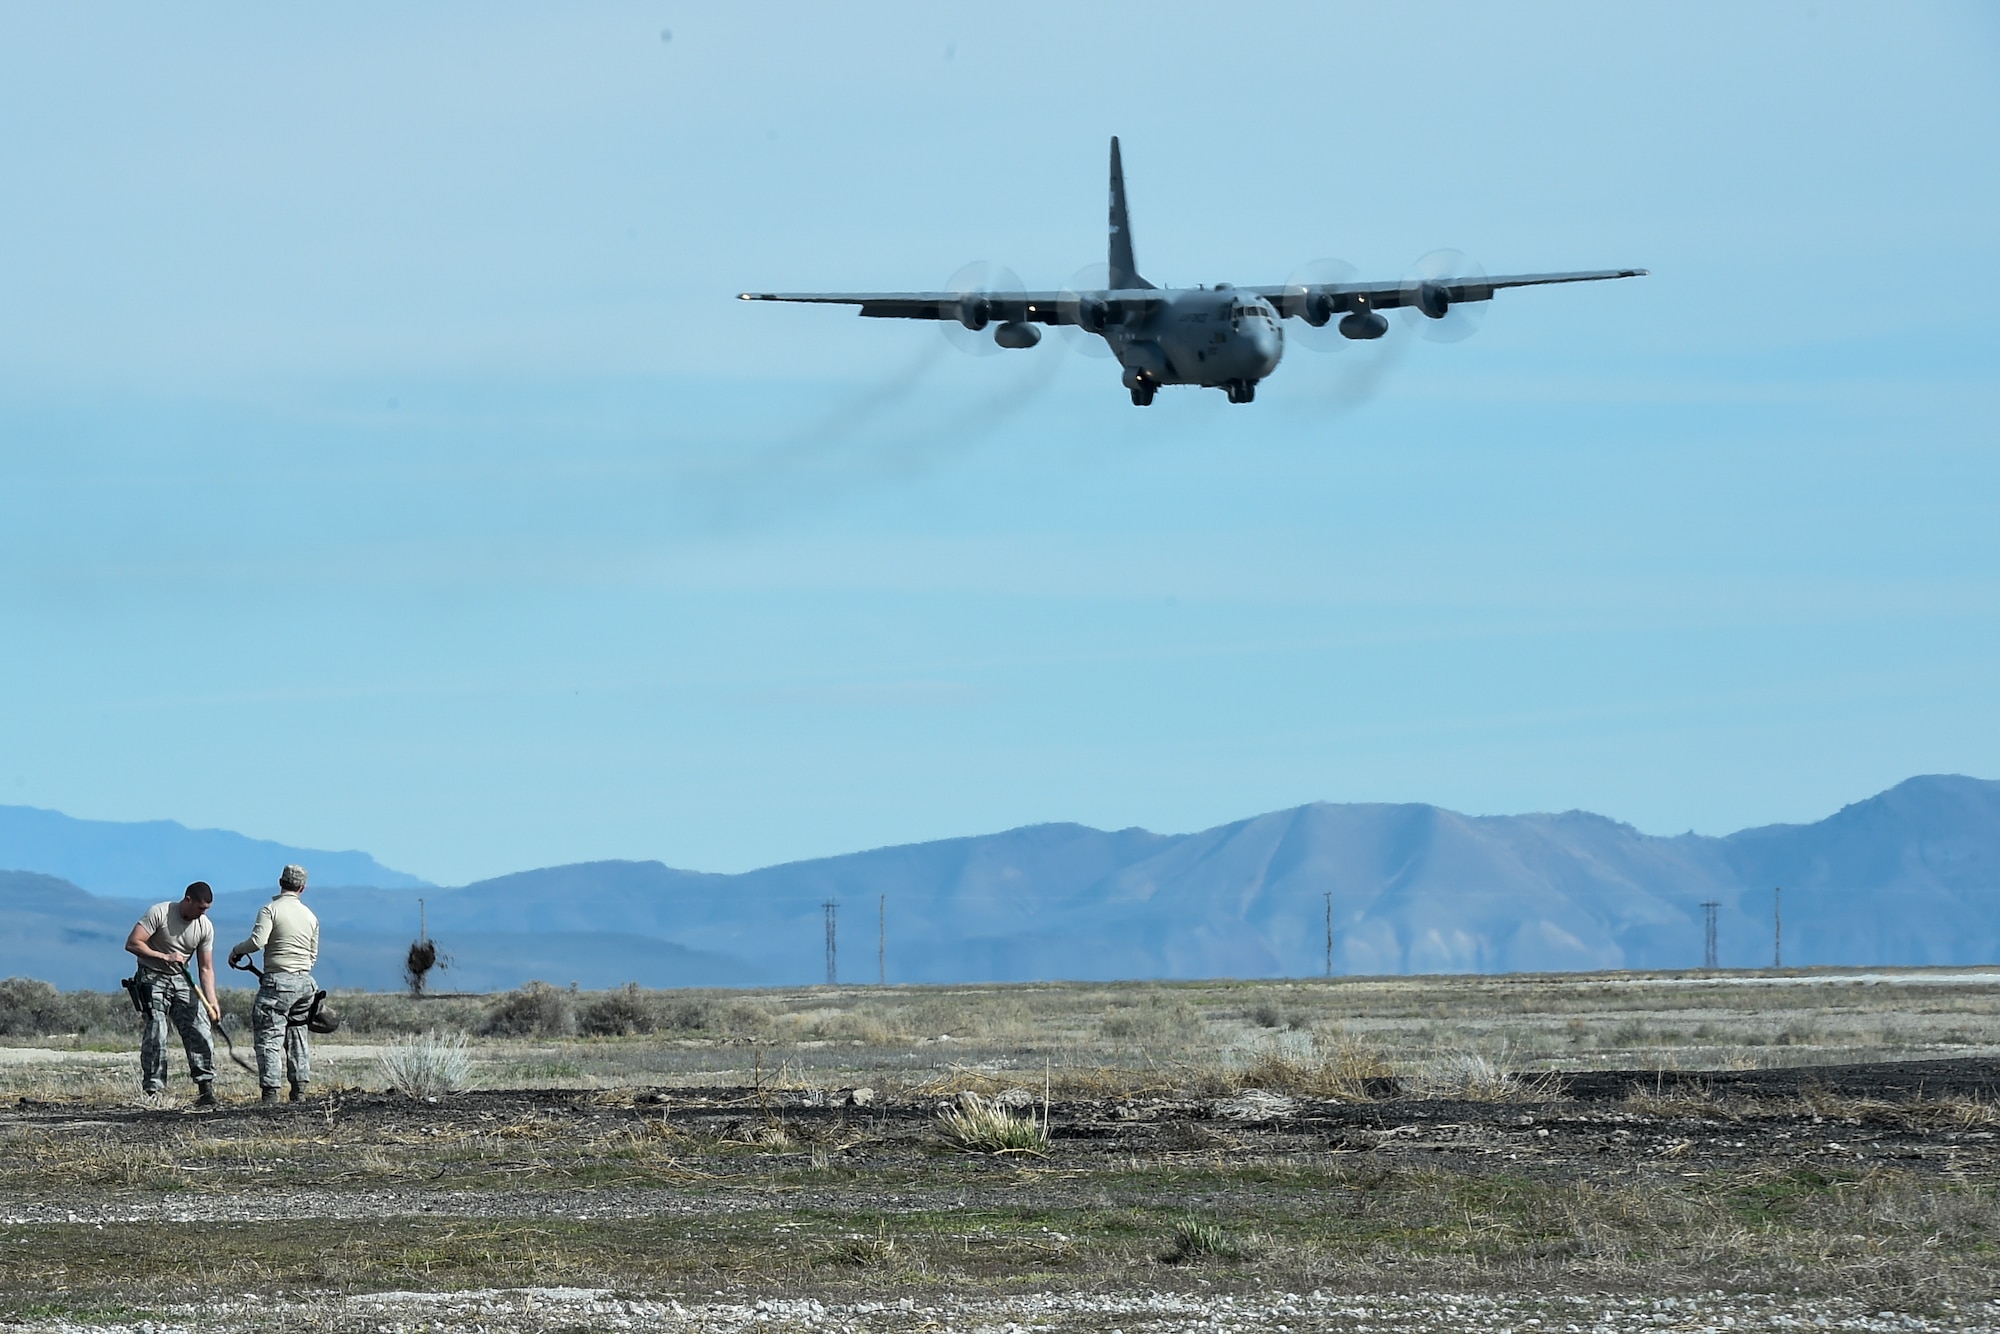 Airmen assigned to the 821st Contingency Response Squadron, build a defense fighting position as a C-130 Hercules aircraft prepares to land during Exercise Turbo Distribution 16-02, March 15, 2016, at Amedee Army Airfield, Calif. Defense fighting positions allow cover and concealment from the enemy and in conjunction with others allows 360 degrees field of fire around the base. (U.S. Air Force photo by Staff Sgt. Robert Hicks/Released)